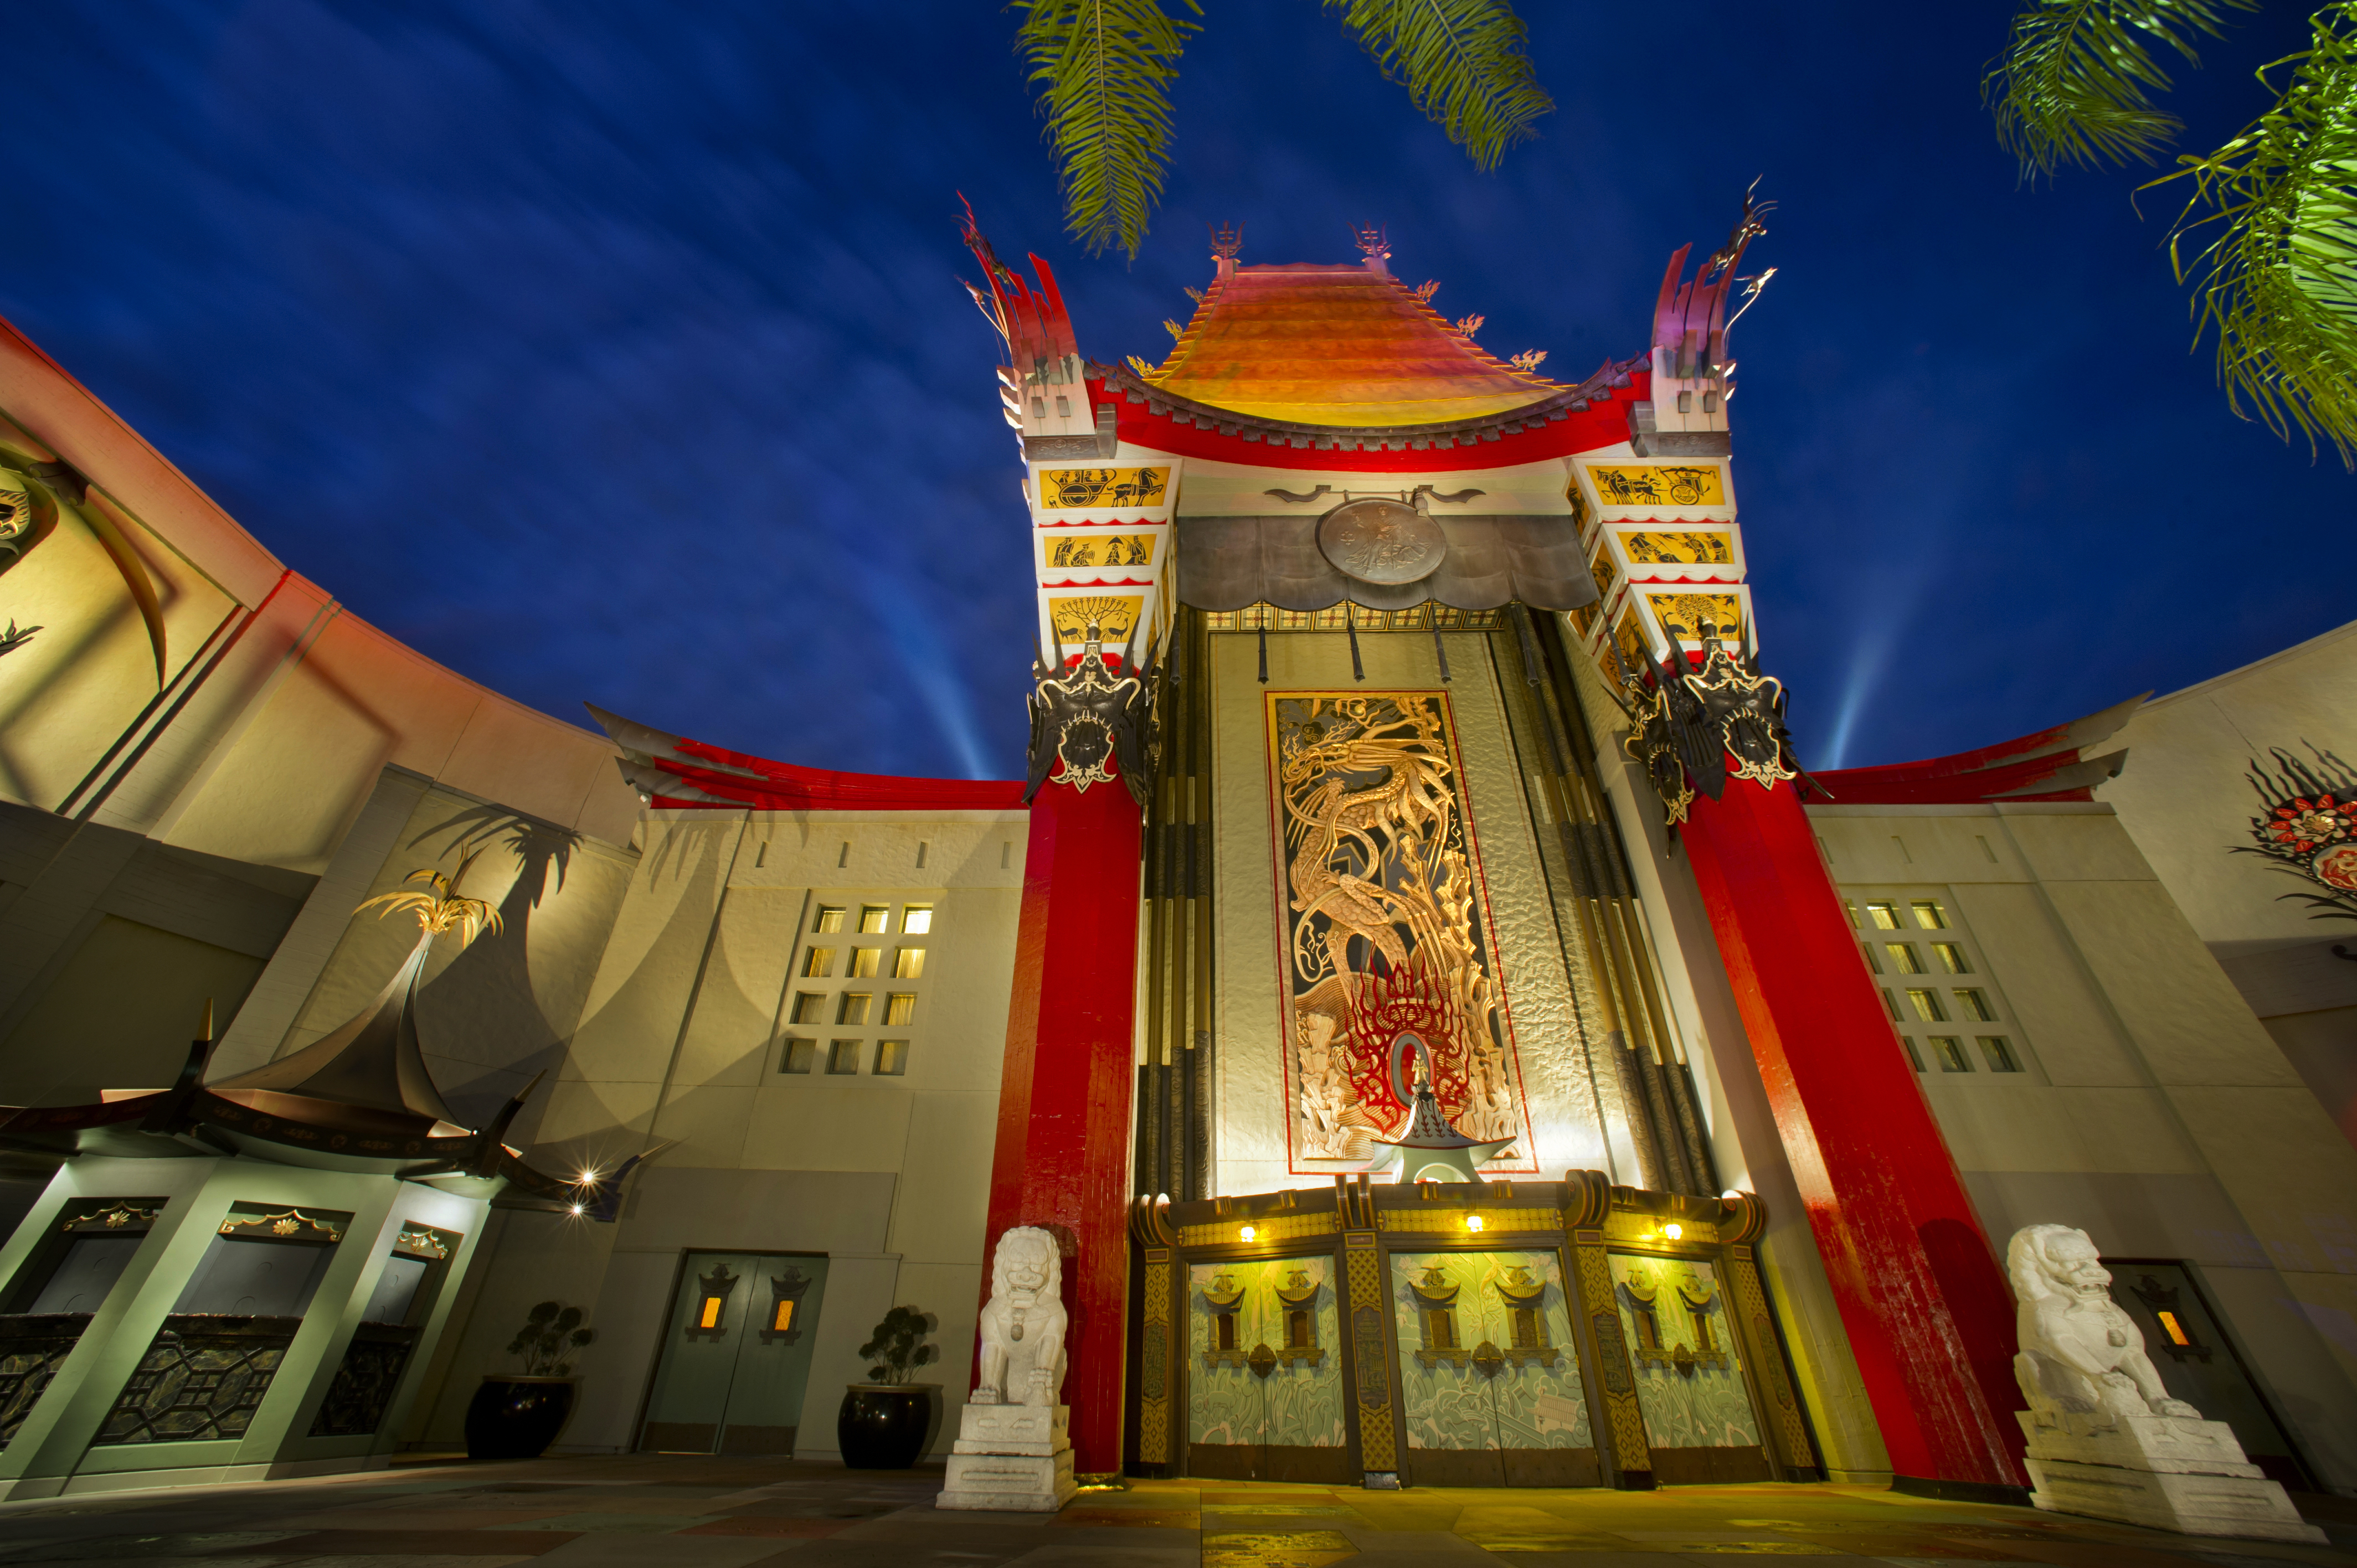 An up-looking angle of the Chinese Theater in Disney's Hollywood Studios at night with spotlights in the background and the red, orange, yellow and beige building itself lit up by lights.